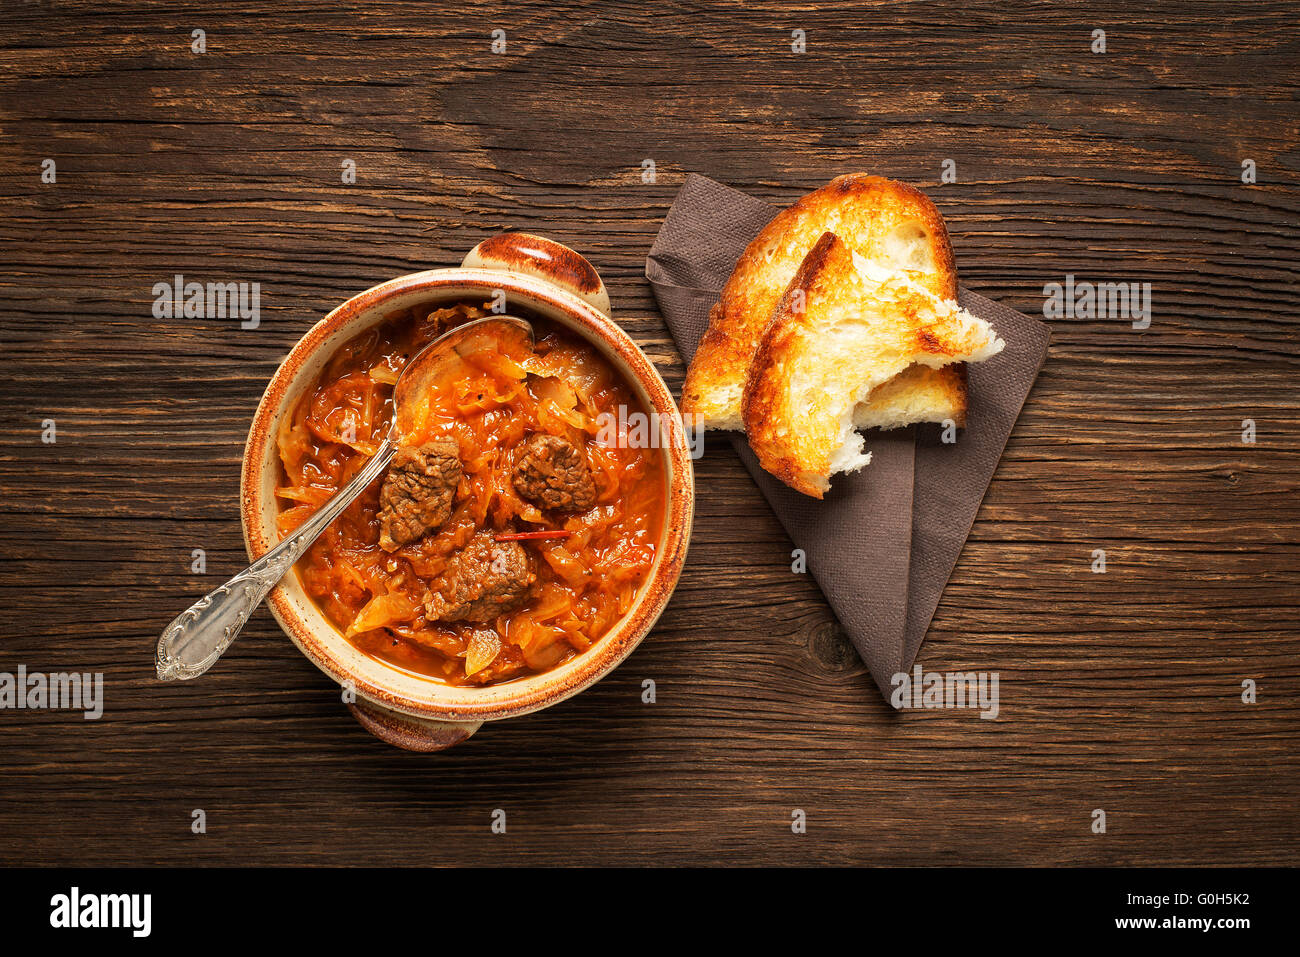 Goulash cabbage with beef on wooden background. Stock Photo